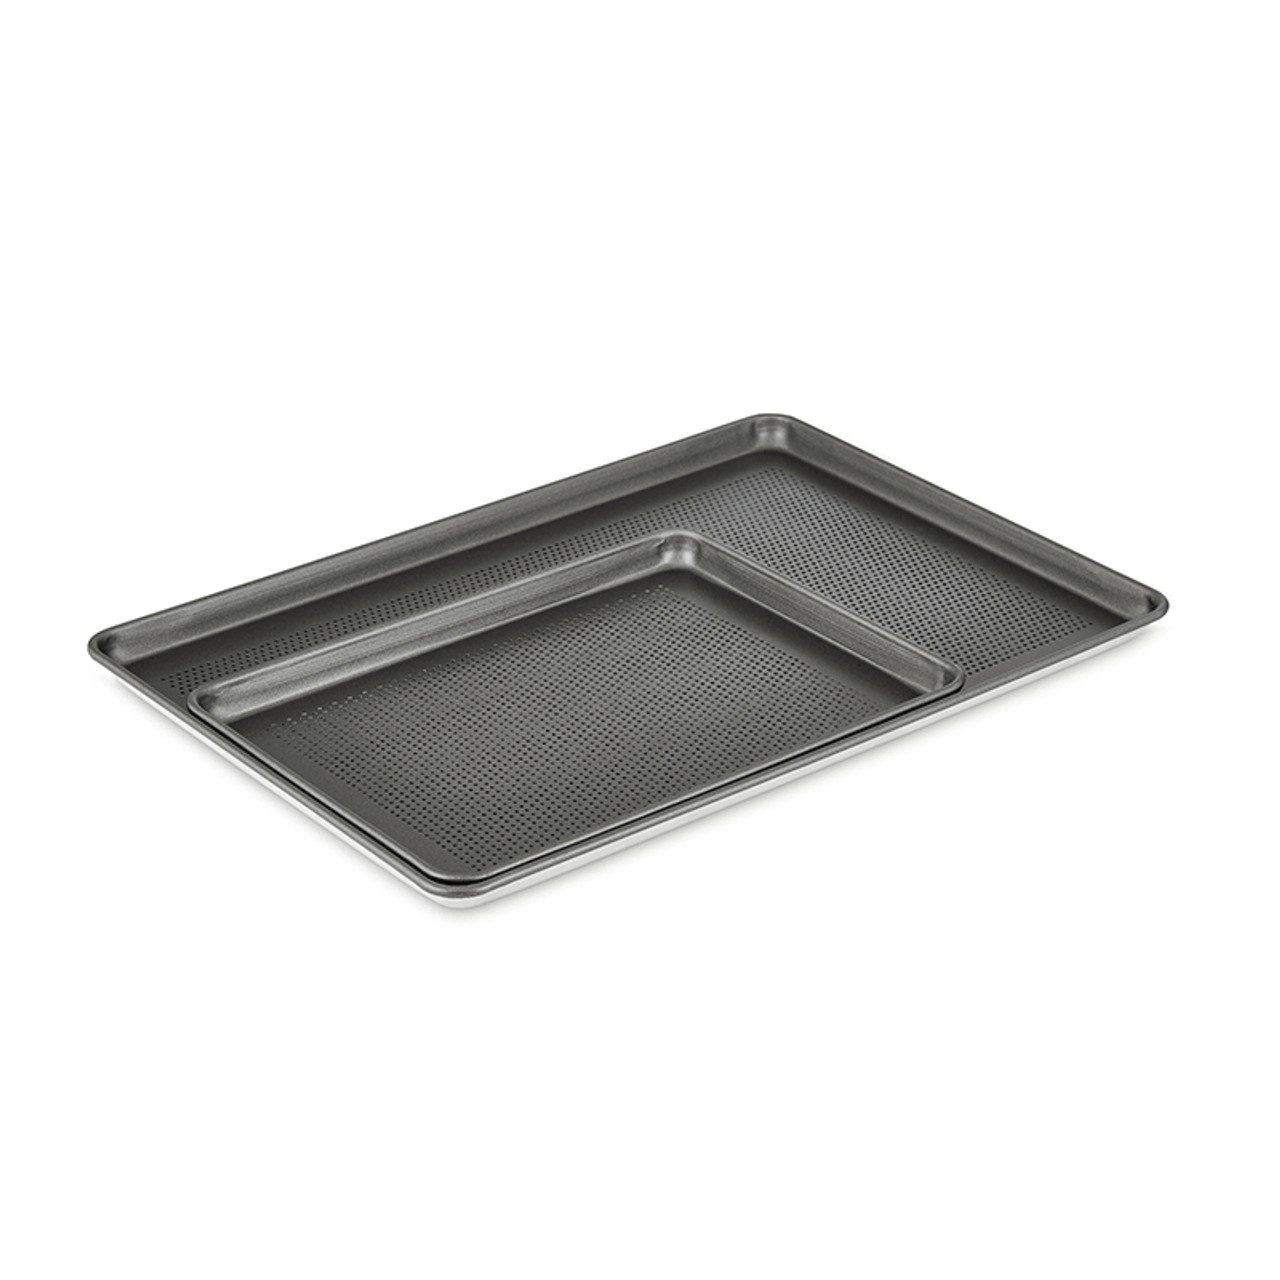 https://cdn11.bigcommerce.com/s-g3i86bef61/images/stencil/1280x1280/products/2693/486/Vollrath-5303NSP-Wear-Ever-Perforated-Sheet-Pan__74431.1659460198.png?c=1